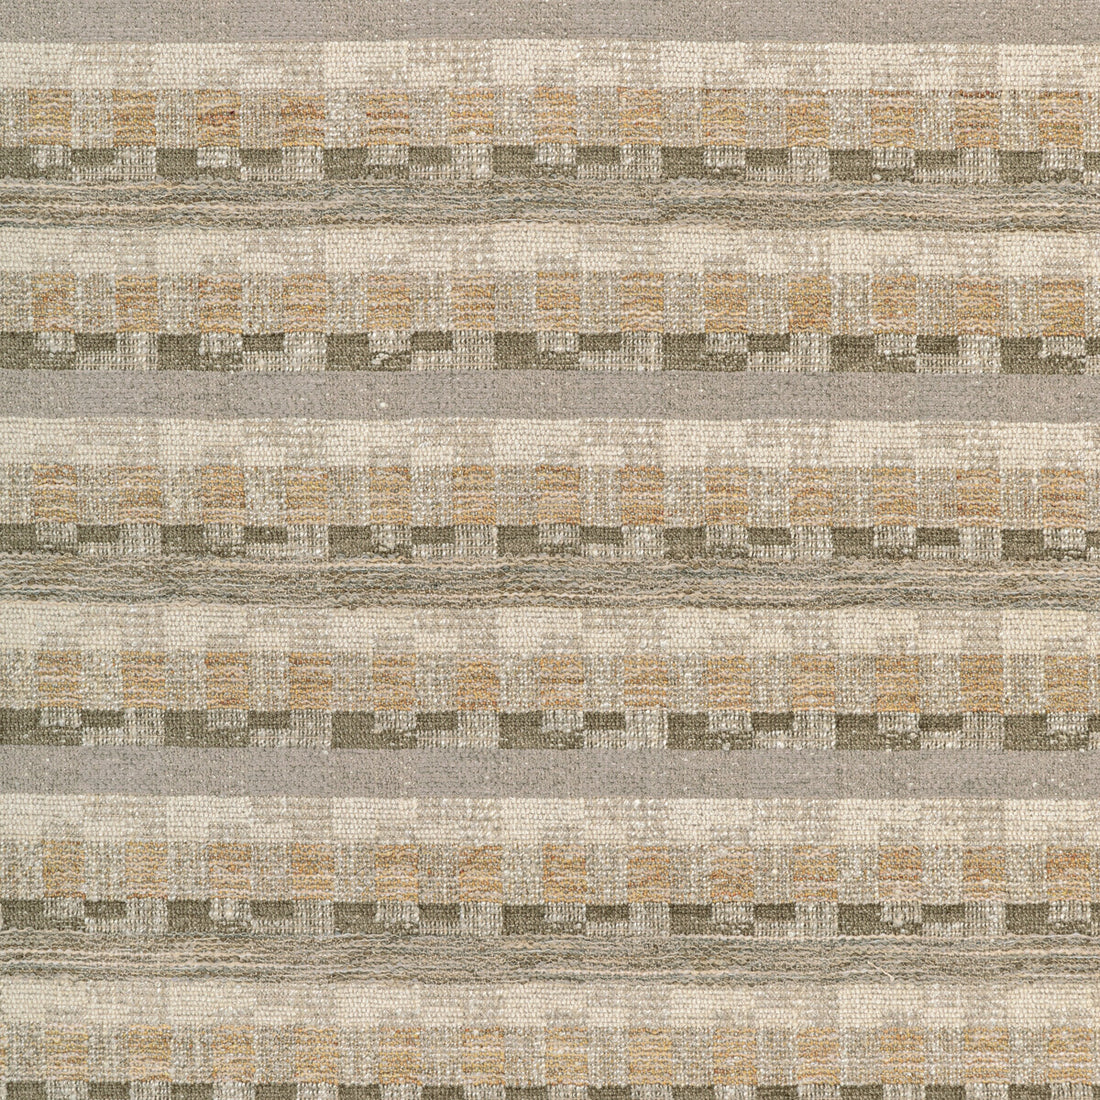 Gridley fabric in goldfinch color - pattern 36392.416.0 - by Kravet Couture in the Barbara Barry Ojai collection